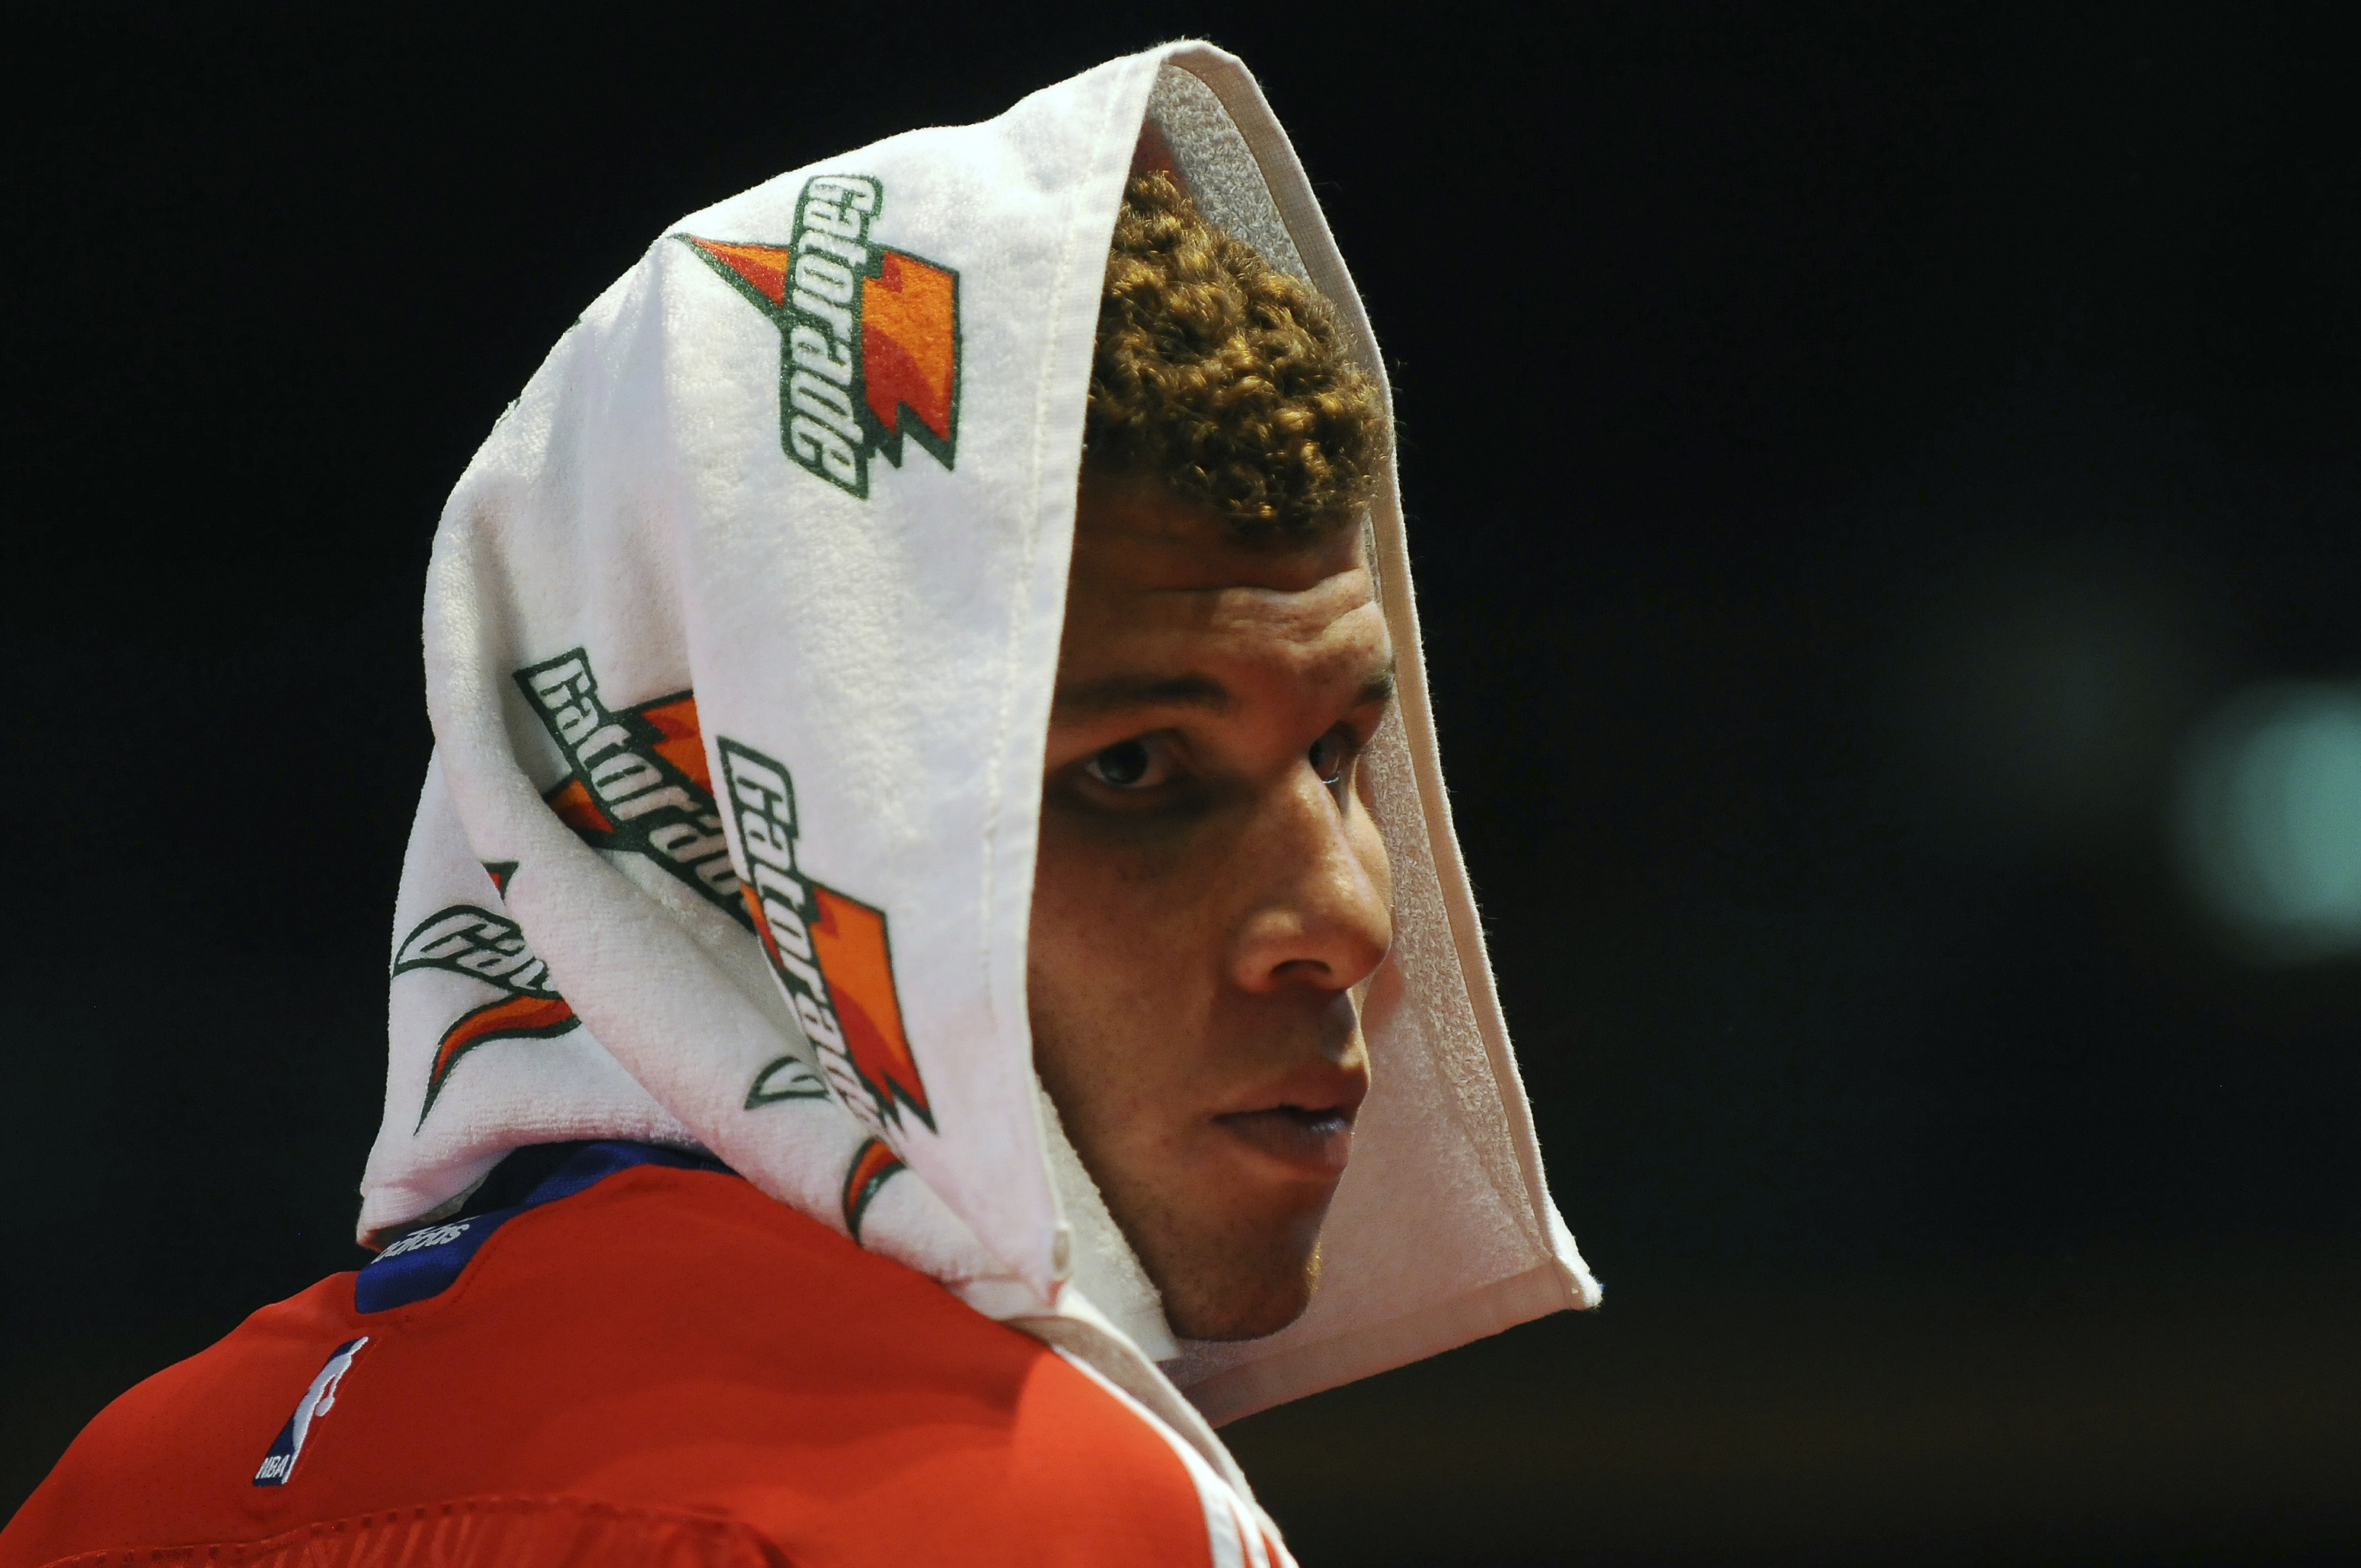 Blake Griffin On His First Years in the NBA: ‘I Wish I’d Handled It Differently’